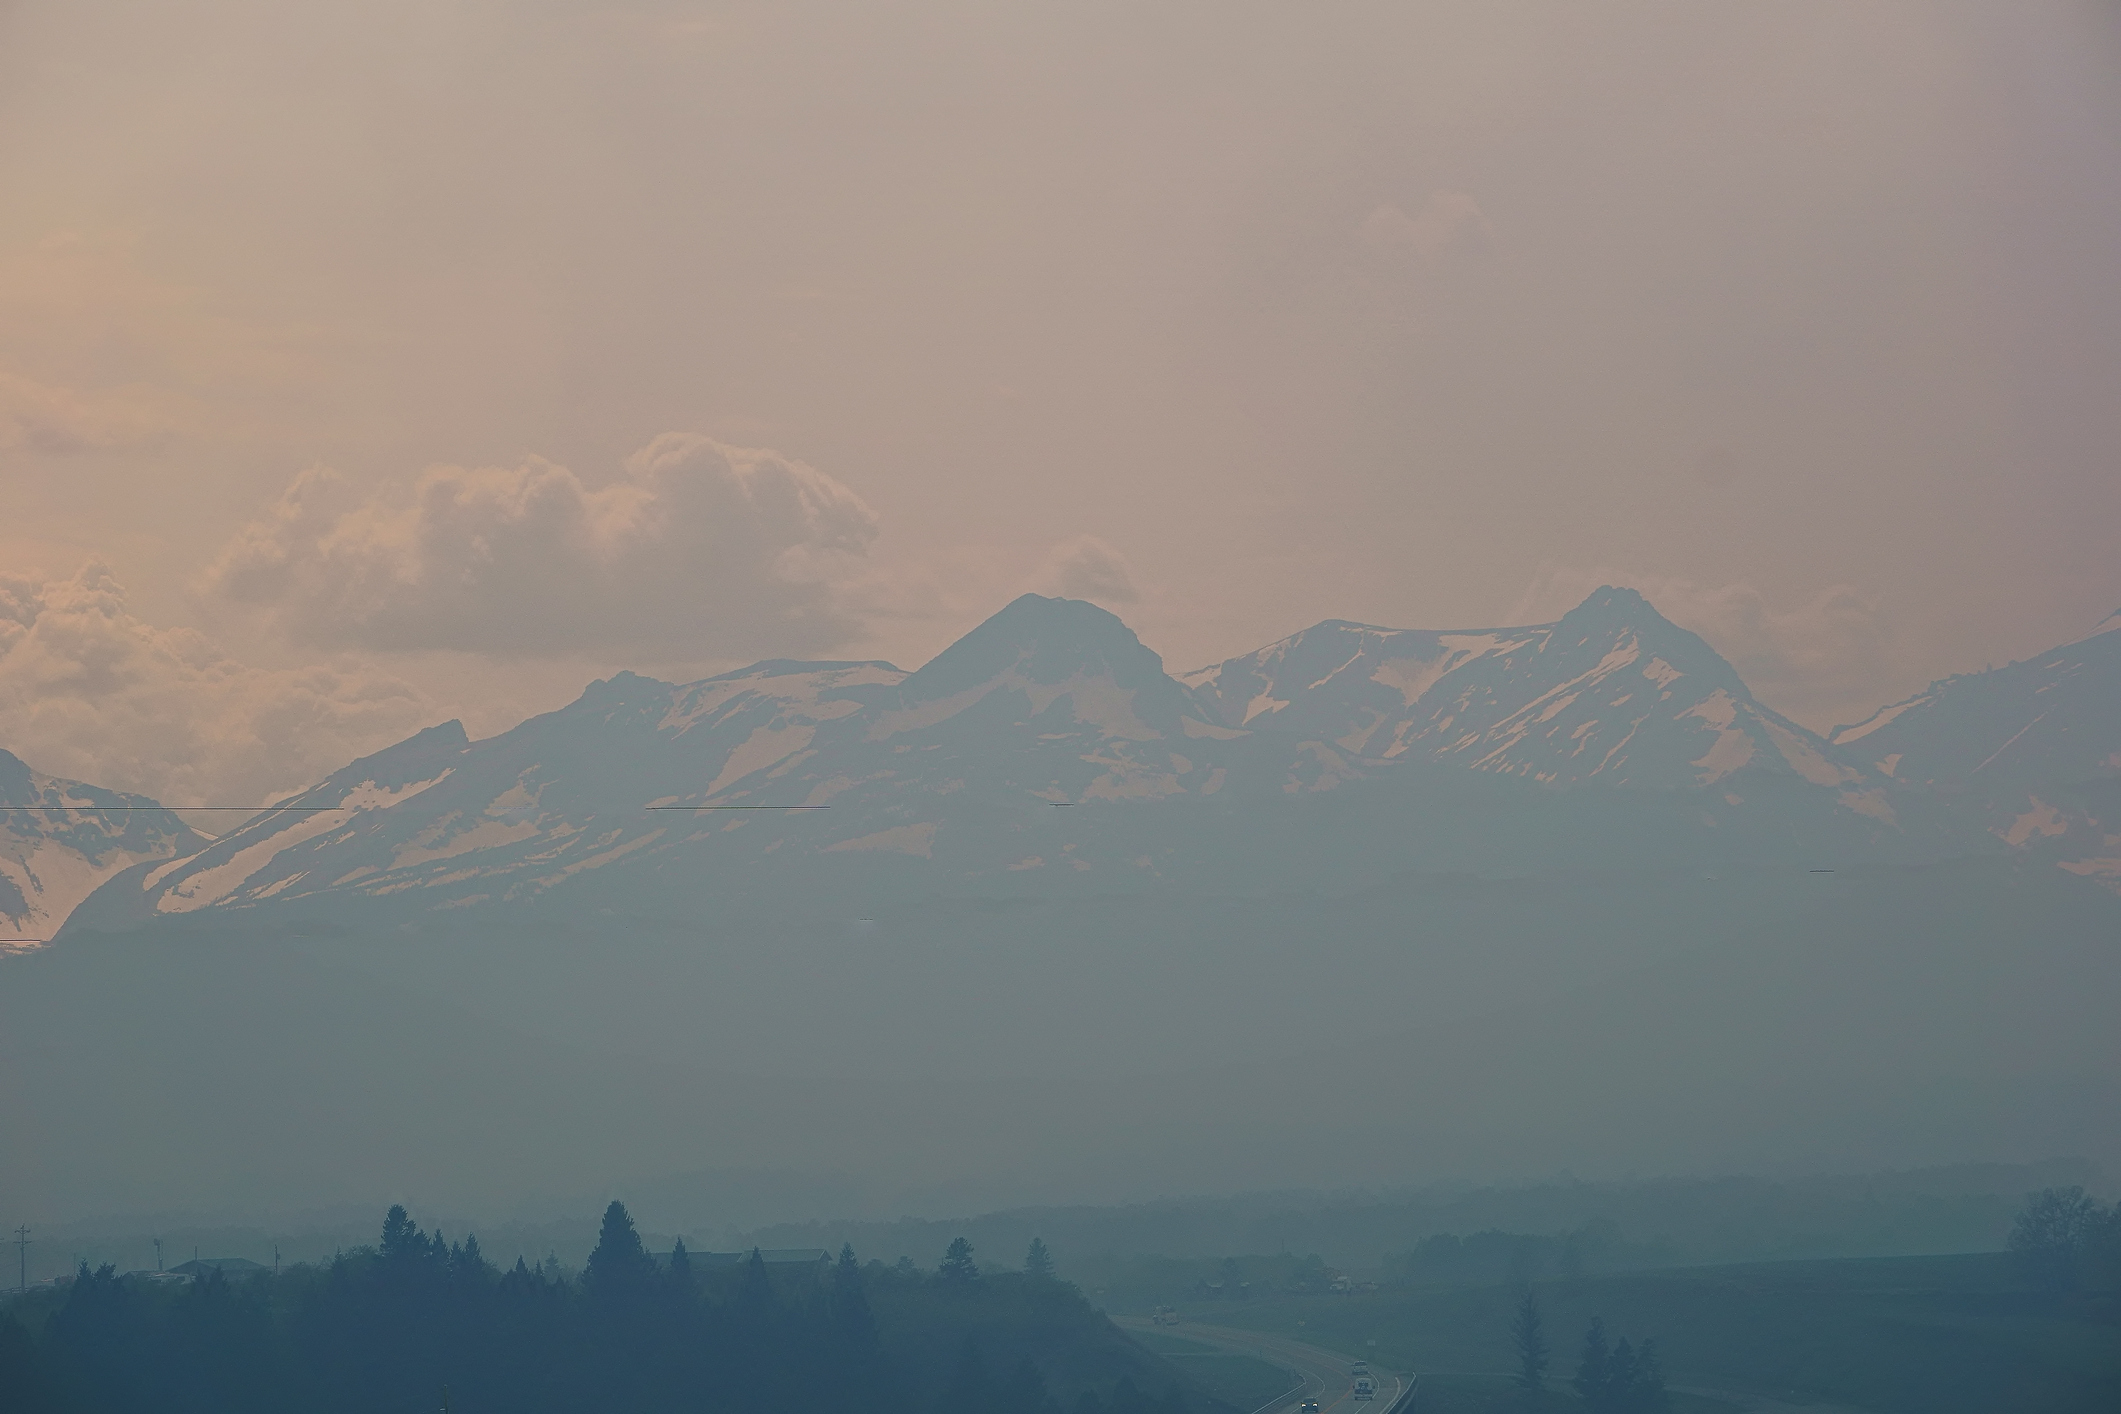 Dancing Woman Mountain and its neighboring peaks are nearly obliterated by smoke drifting in from Canadian wildfires